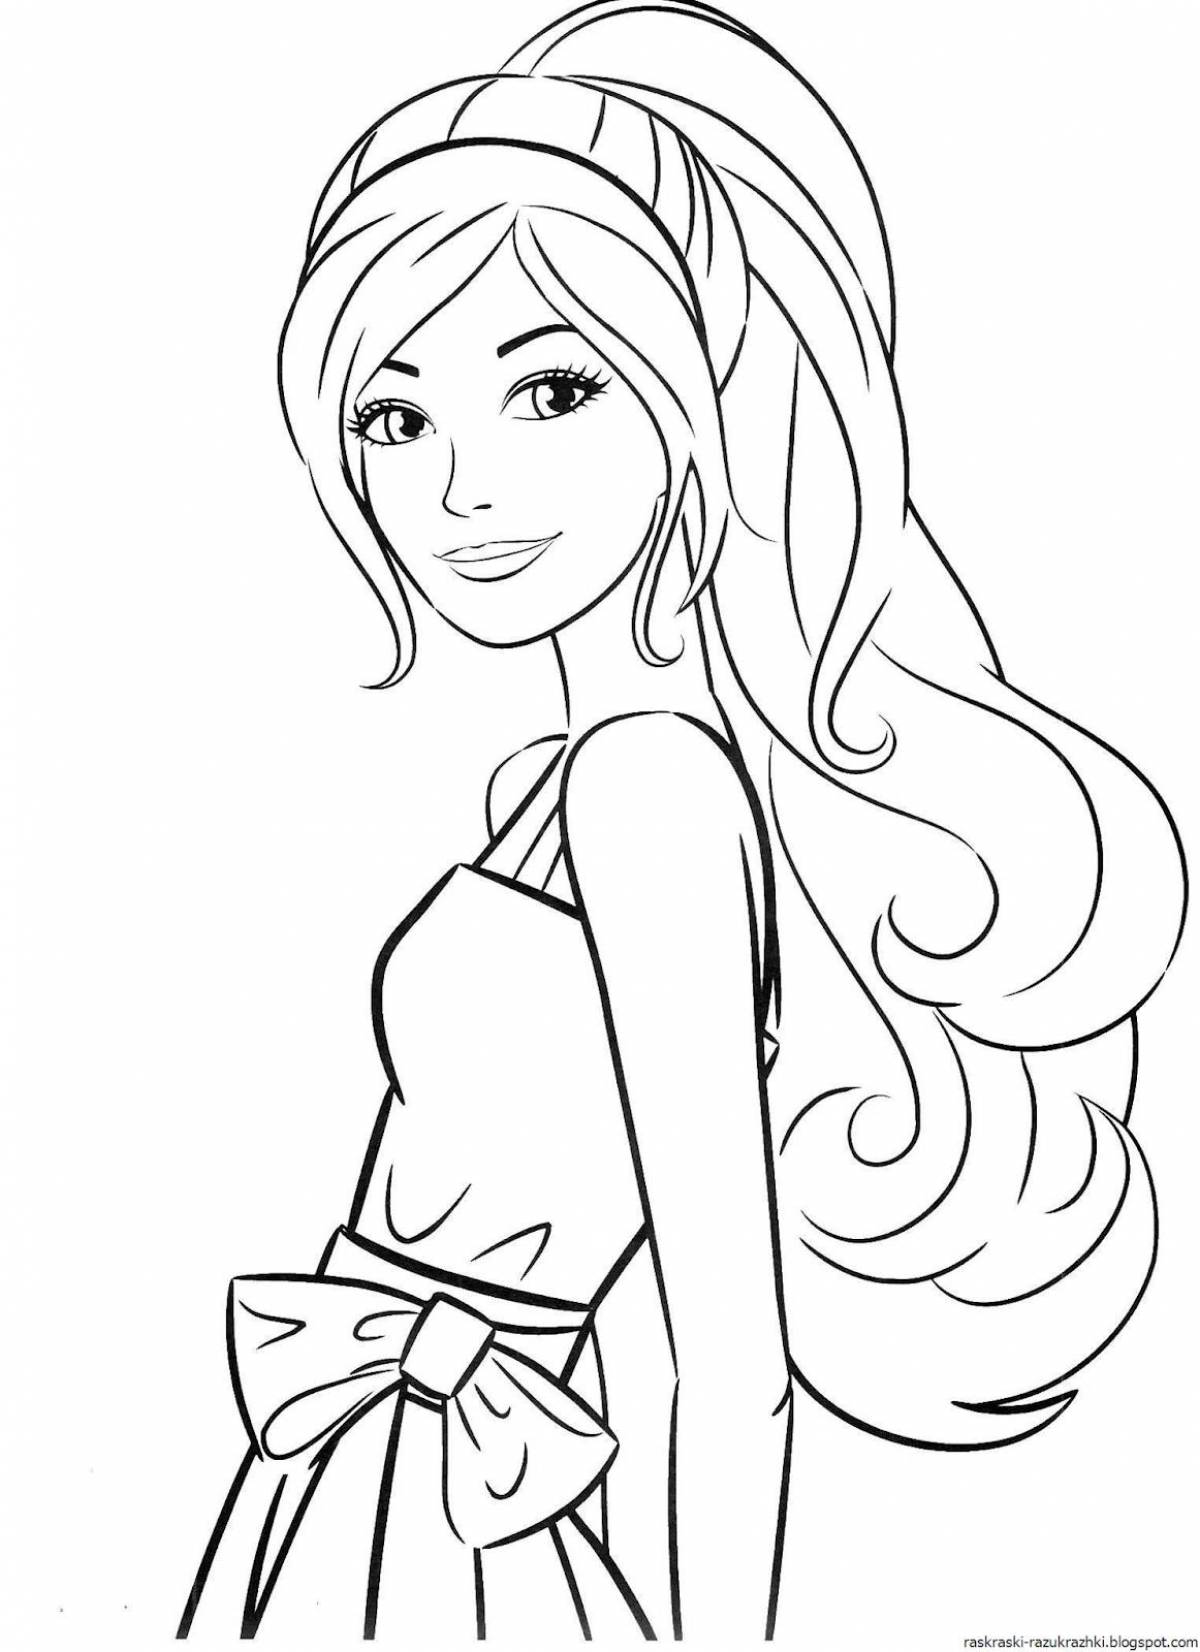 Perfect barbie coloring page